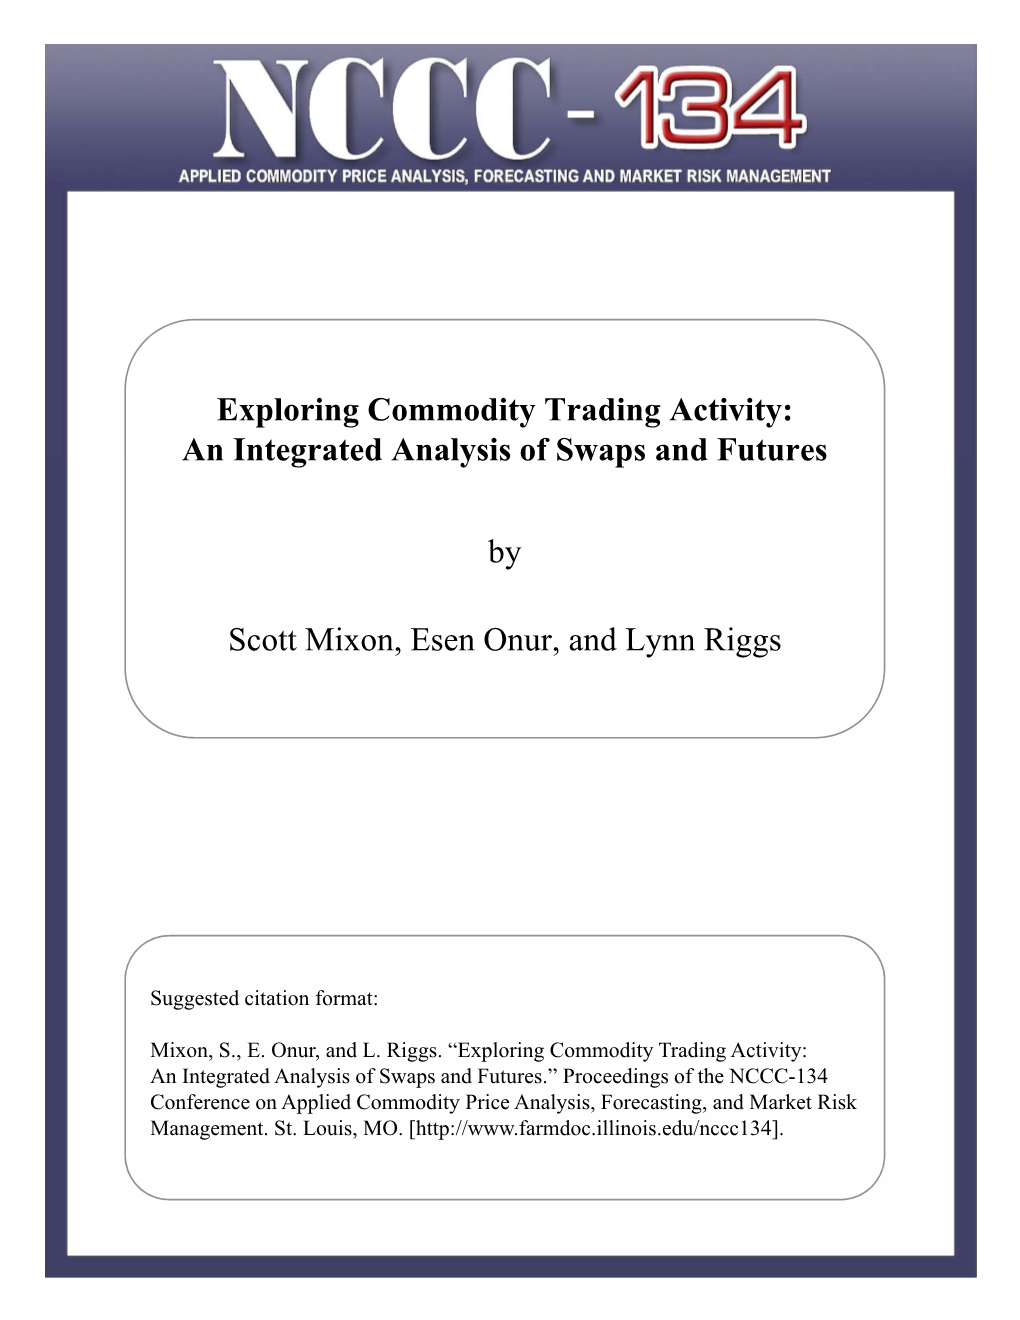 An Integrated Analysis of Swaps and Futures by Scott Mixon, Esen Onur